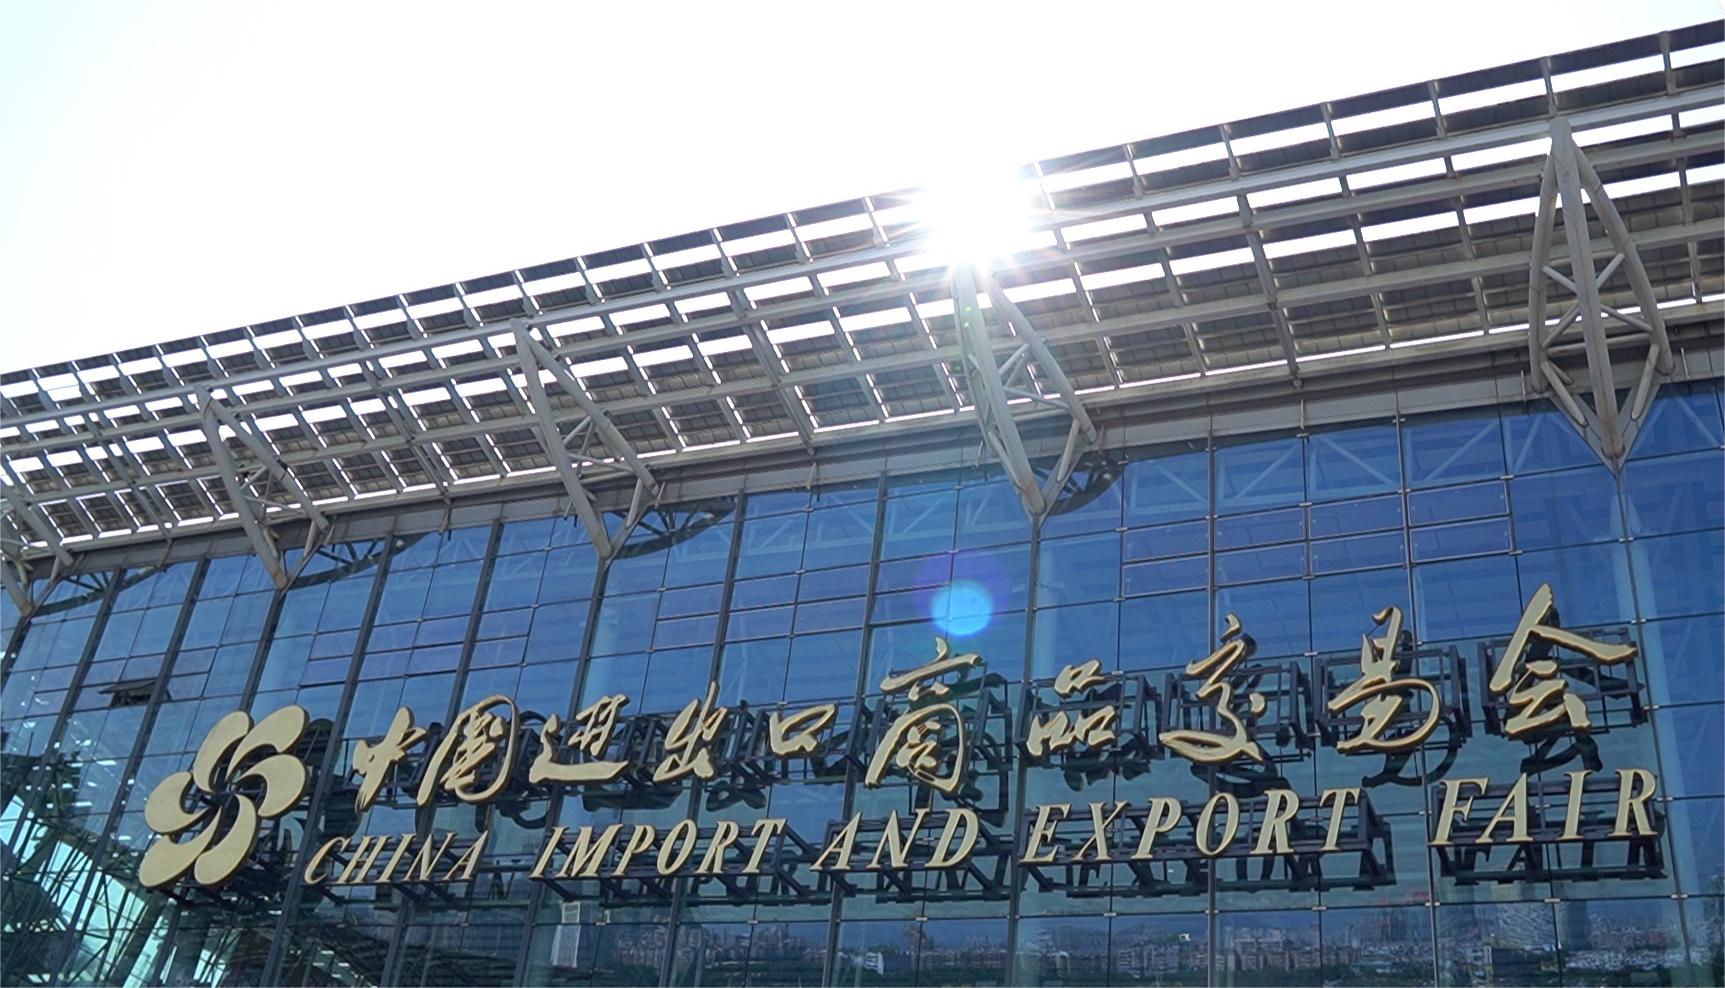 The 135th China Import and Export Fair